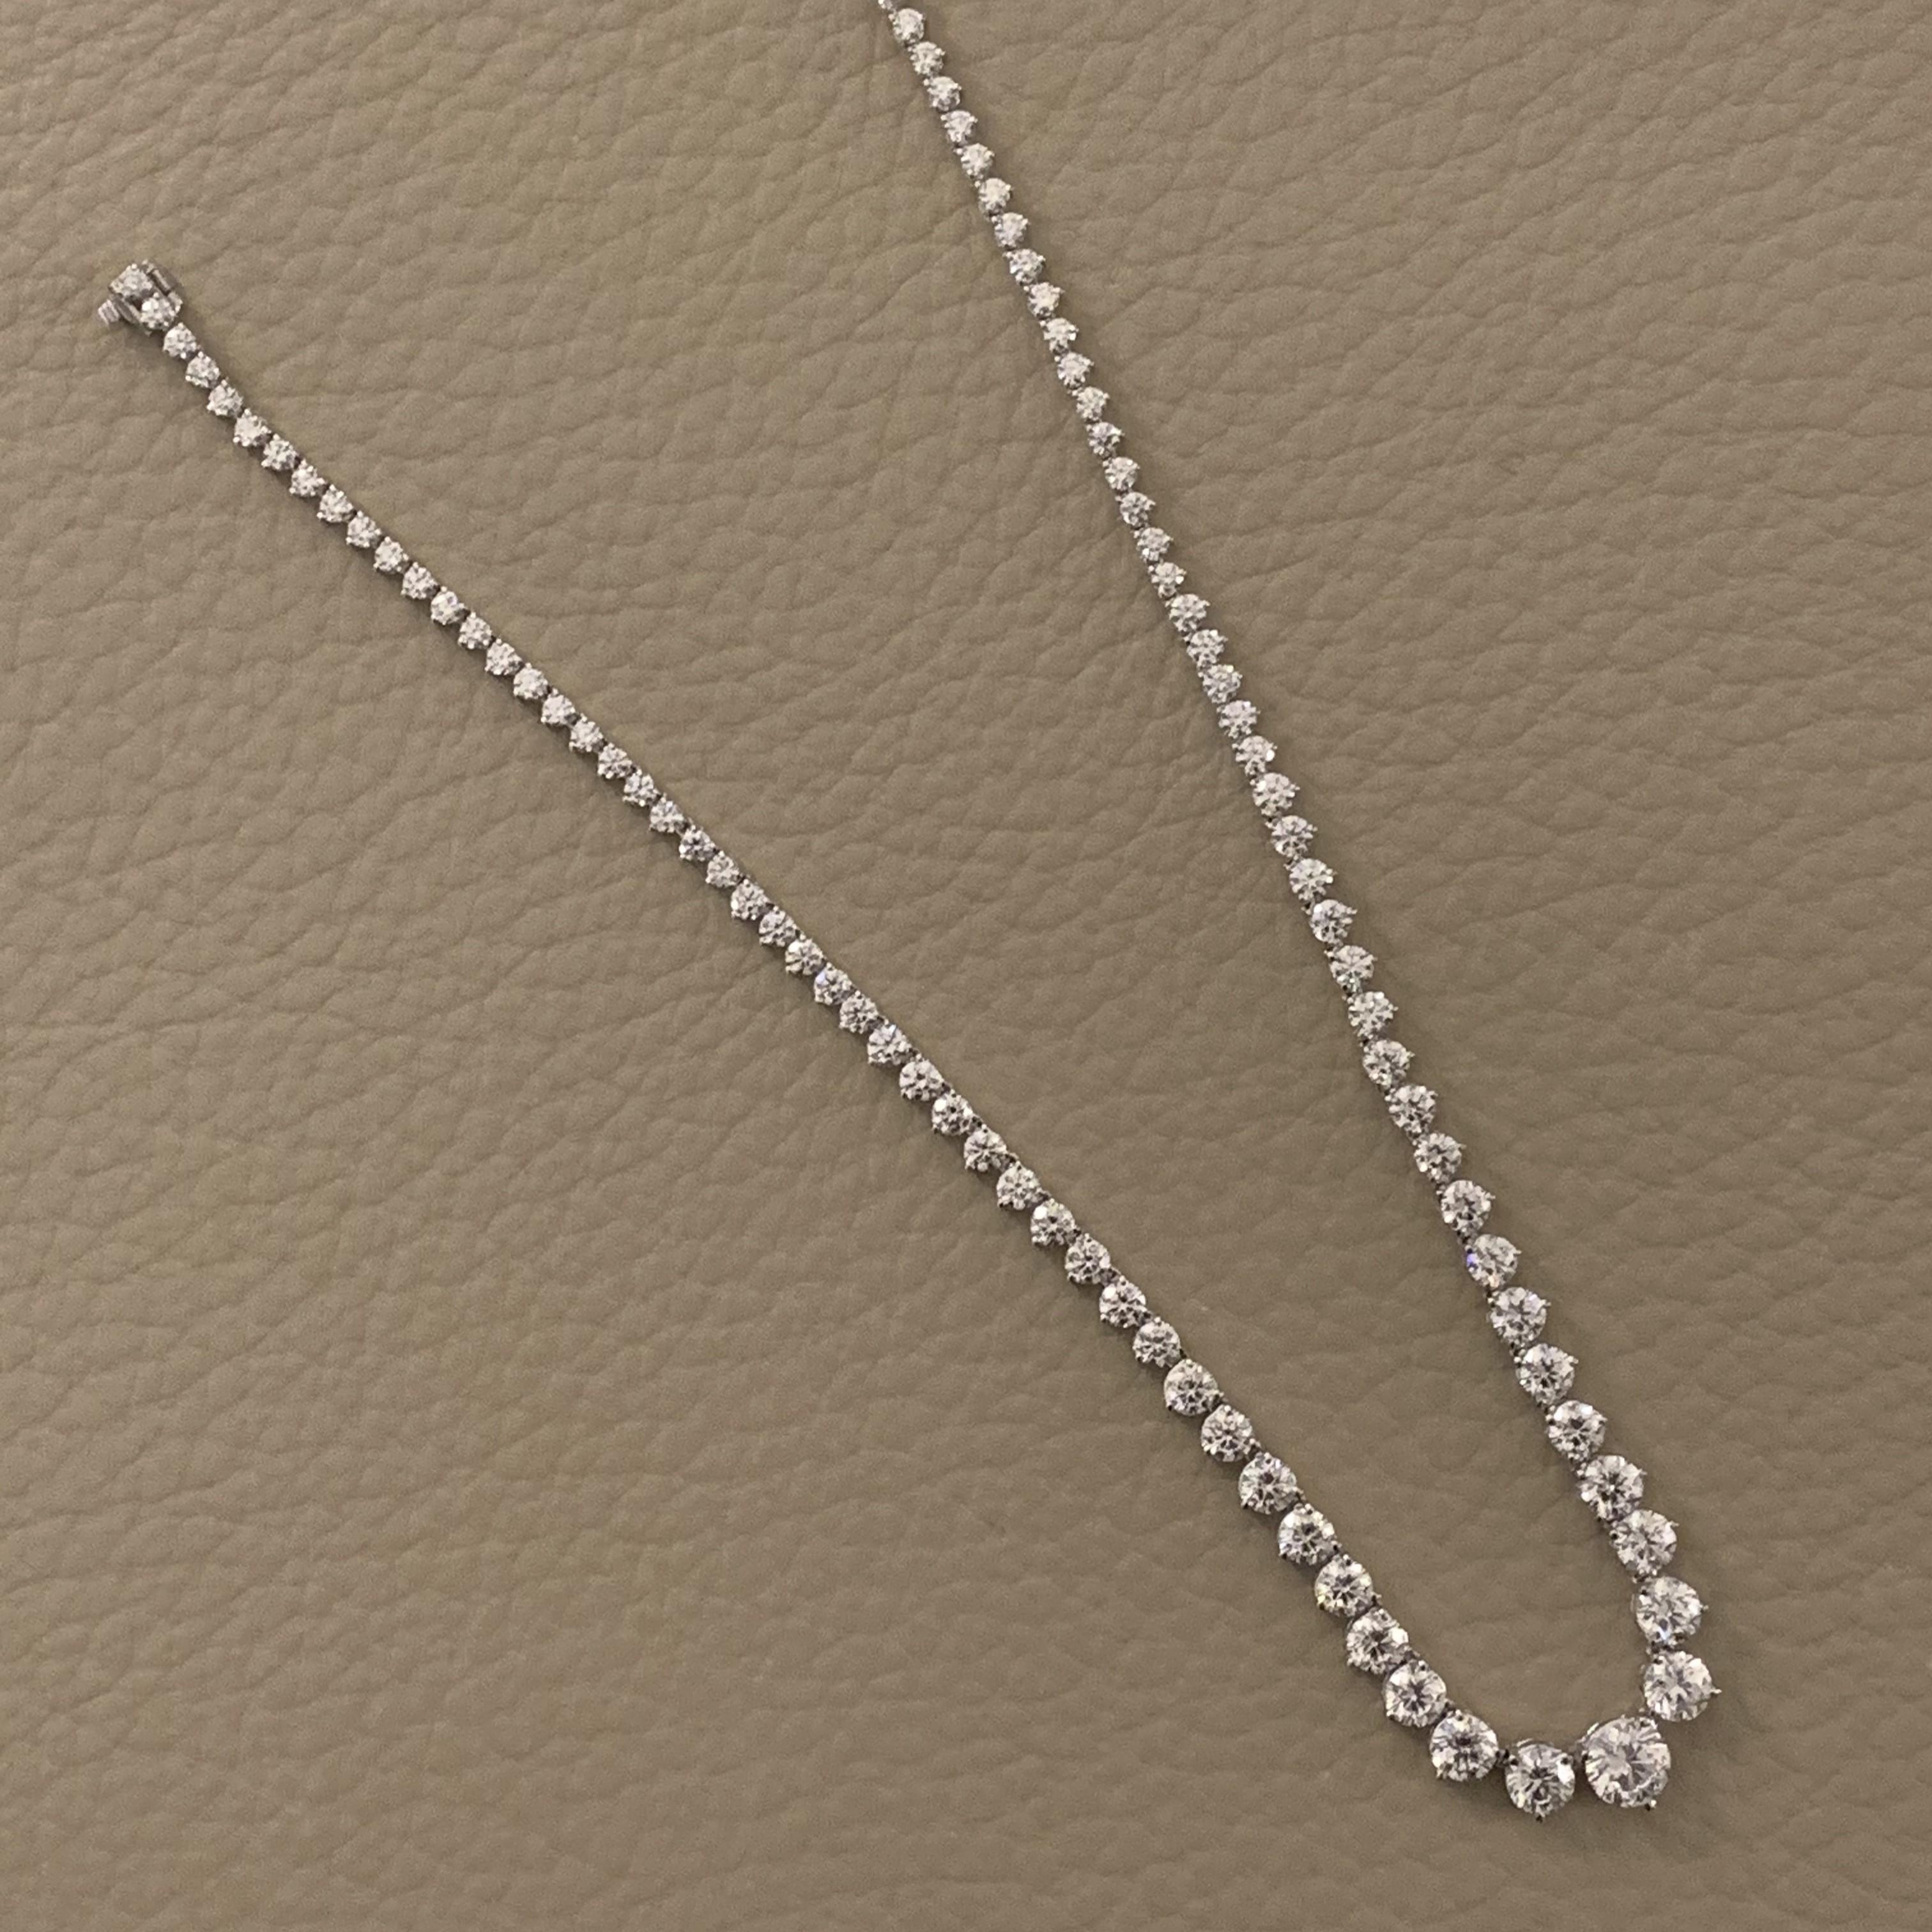 A classic and elegant everyday or occasional wear with graduating diamond sizes, this Tennis Necklace is a timeless and versatile piece of jewelry. All our necklaces have two locks for added security.

Center Diamond Weight: 2.00 ct
Center Diamond